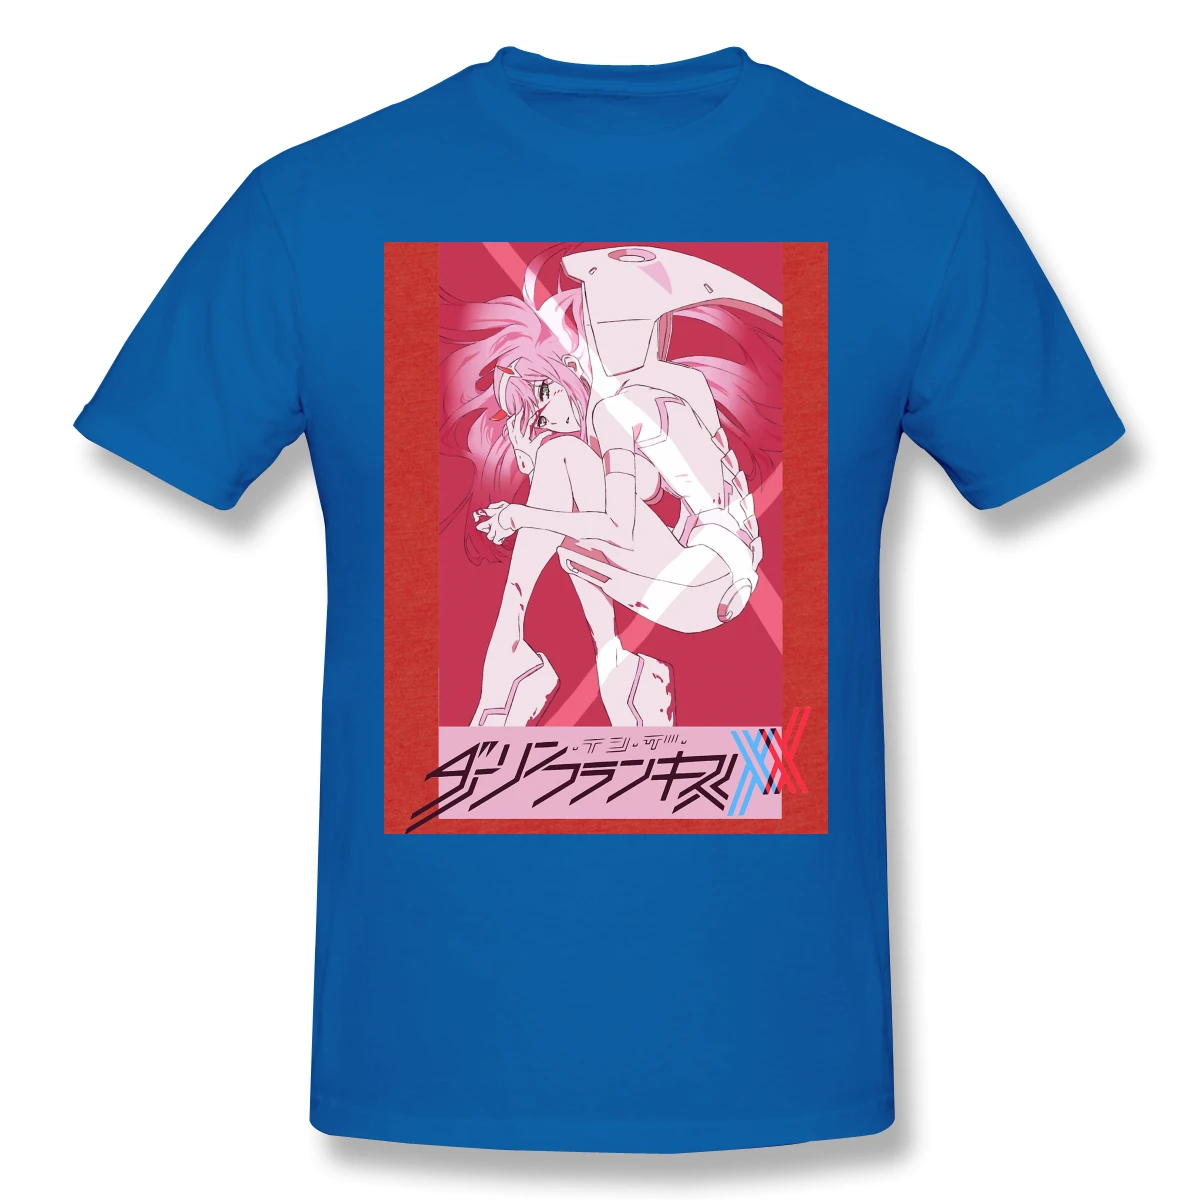 

Darling In The Franxx 2021 New Arrival T-Shirt Zero Two Zero Darling In The FranXX Vaporwave Waifu Crewneck Cotton for Men